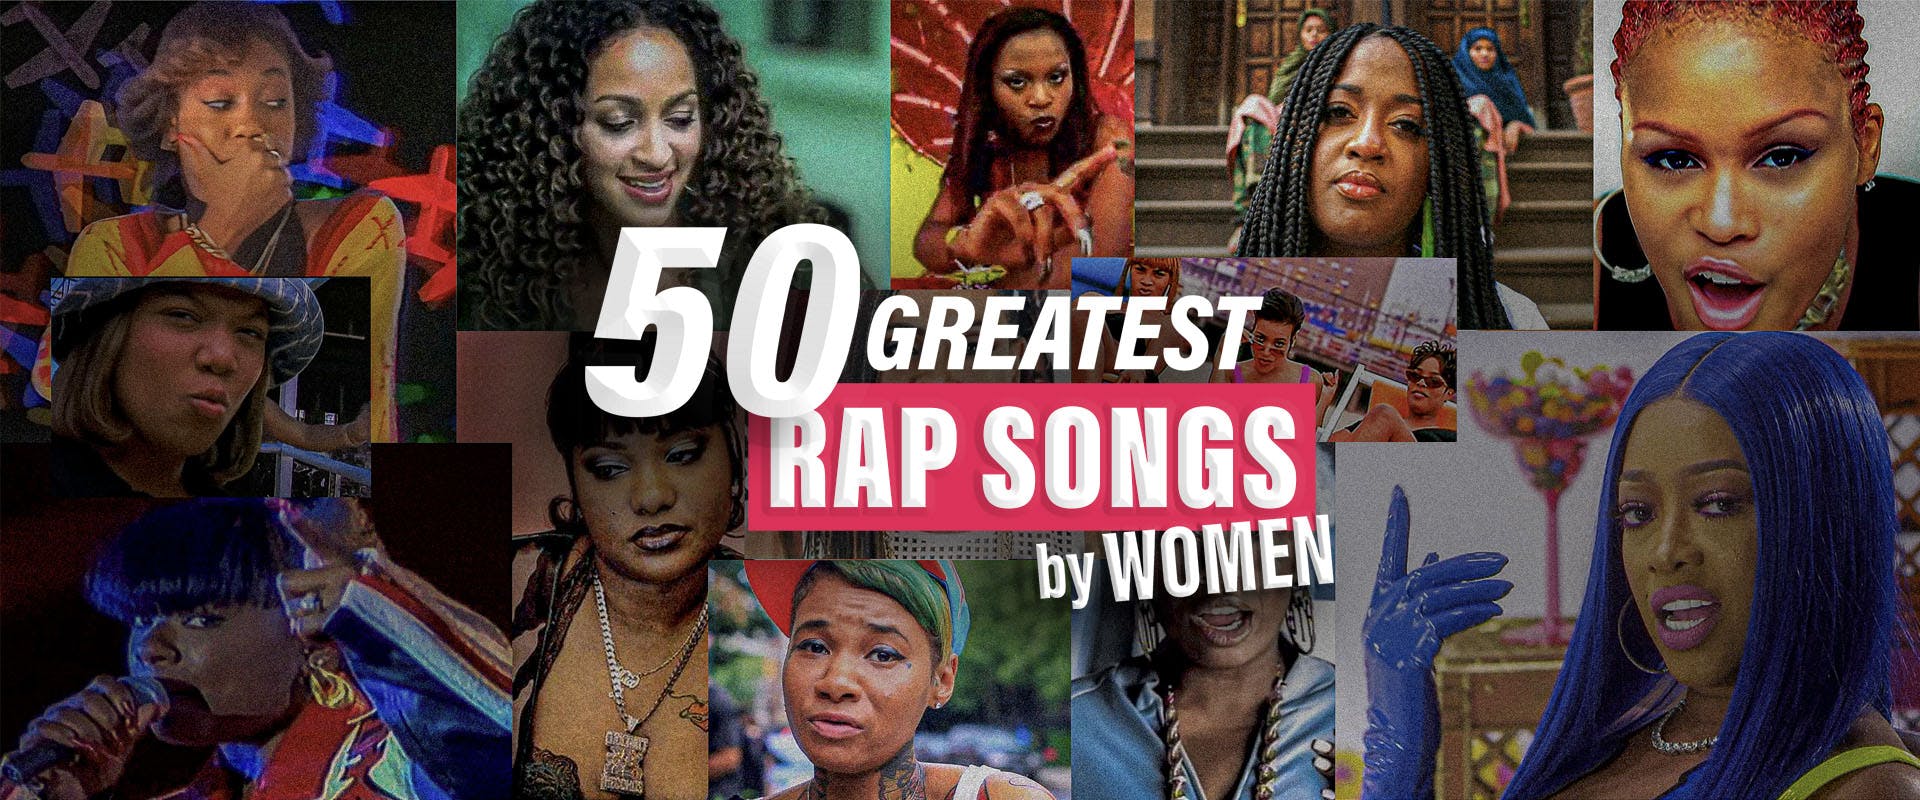 A viral 'top 50 greatest female rappers' list has sparked debate